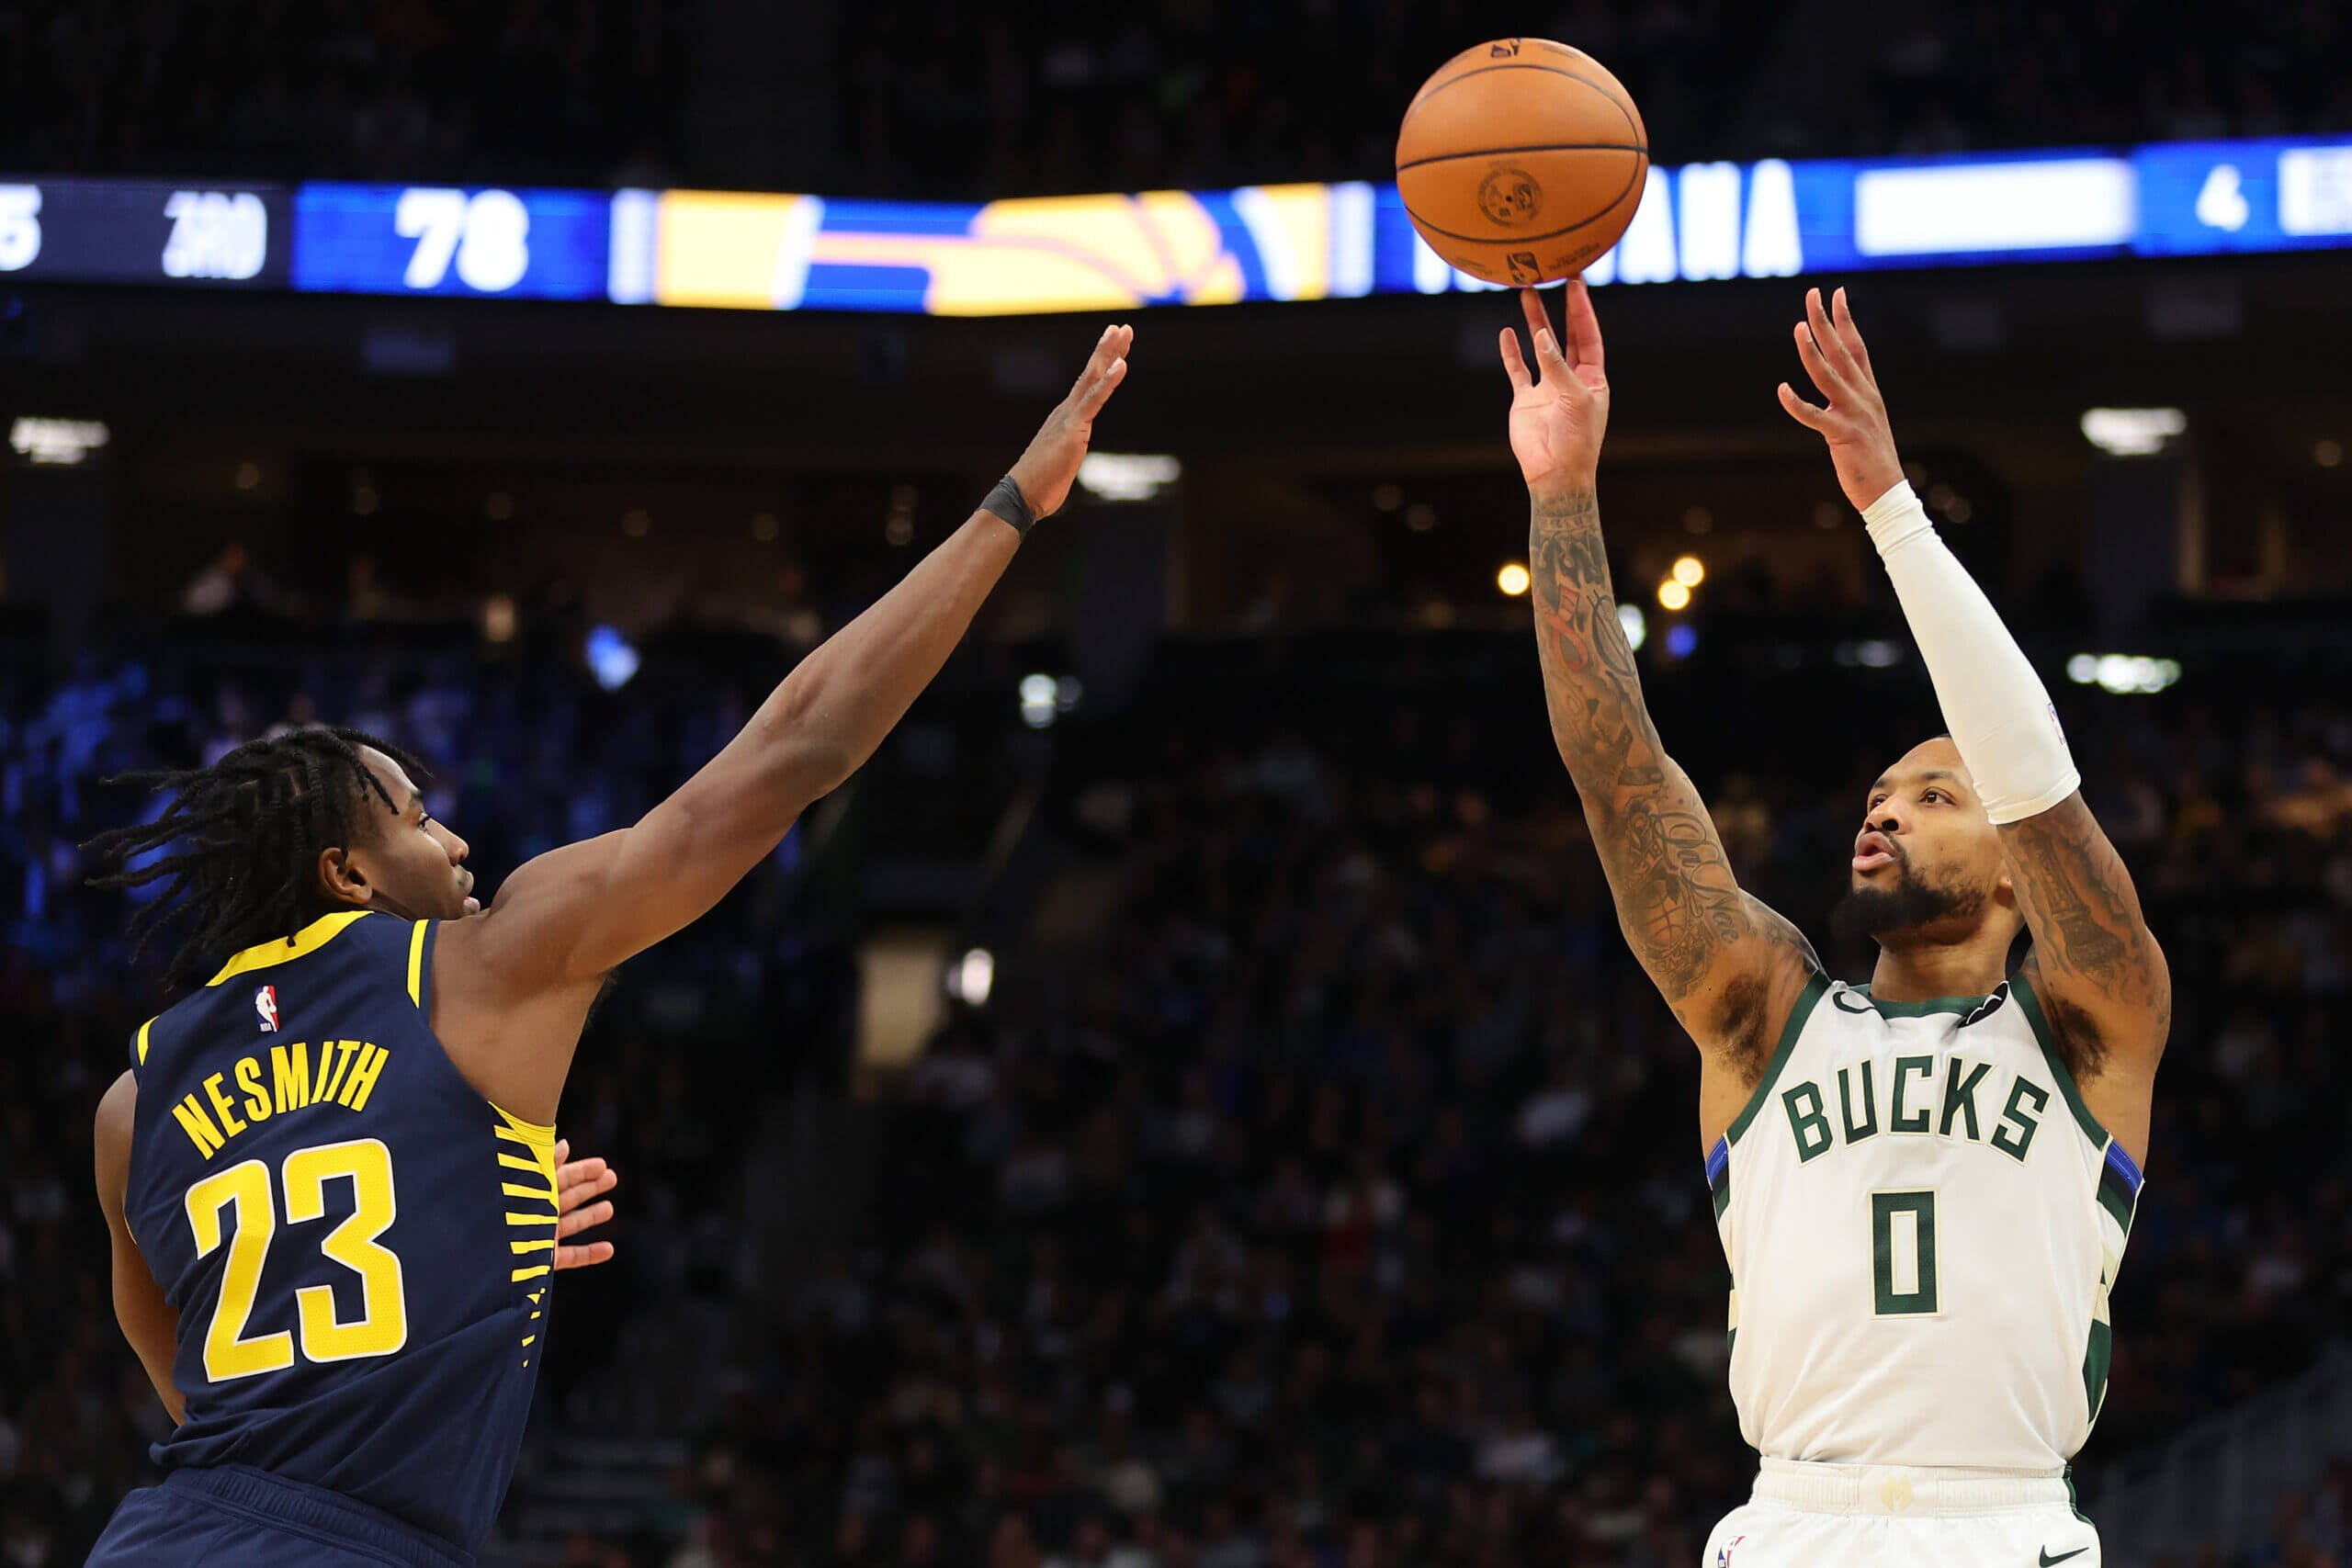 Defending Damian Lillard: How can Pacers slow down the Bucks star?